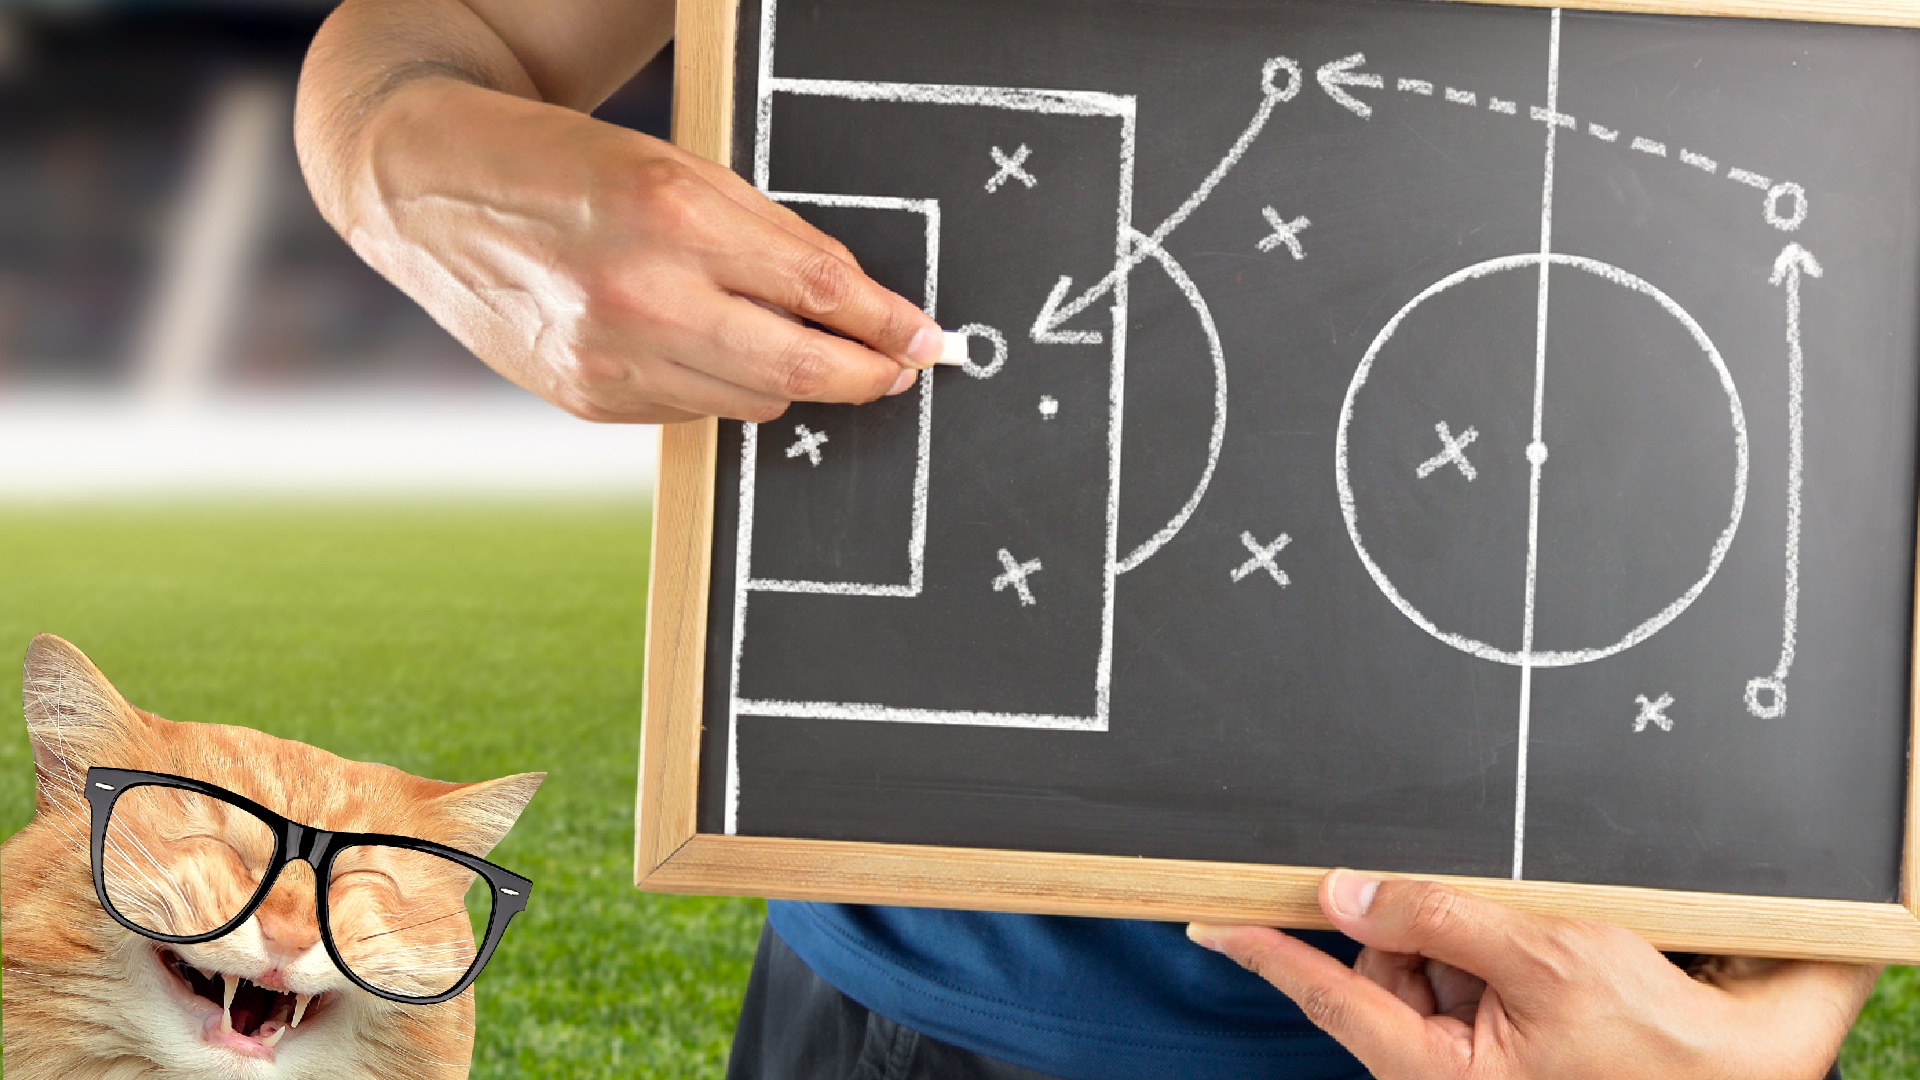 A chalk board with football tactics drawn on